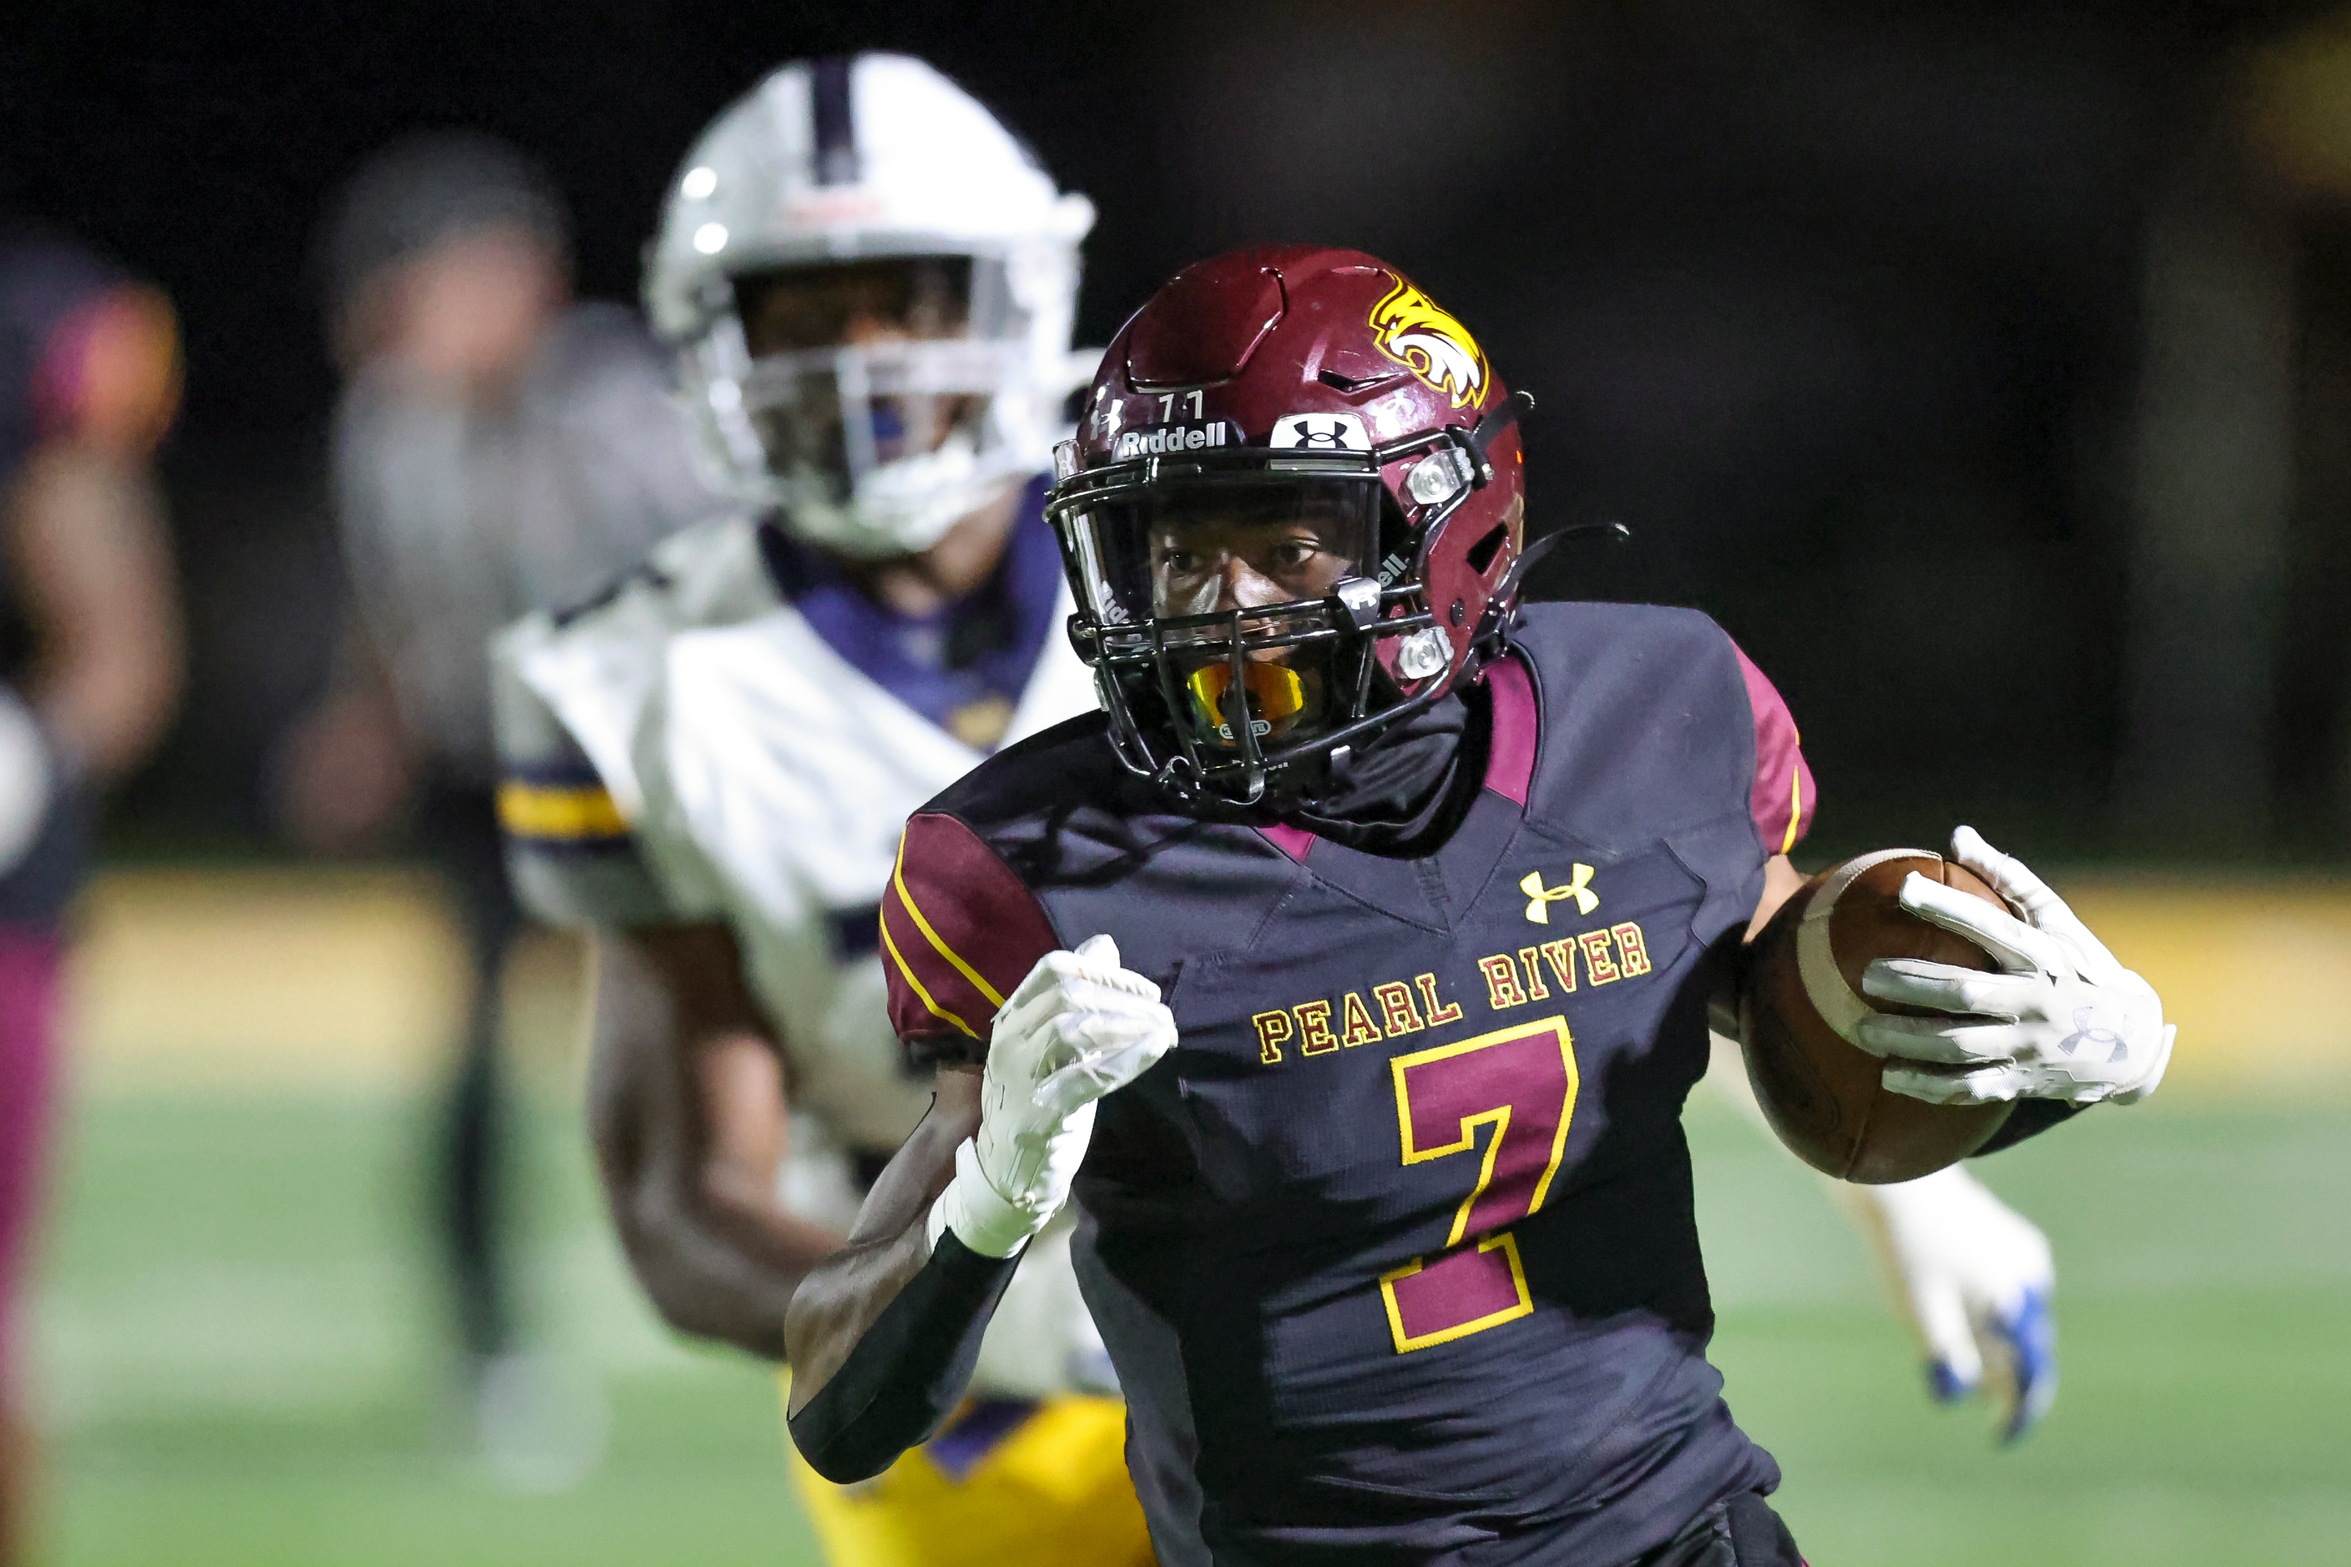 Thursday night looms large for Pearl River